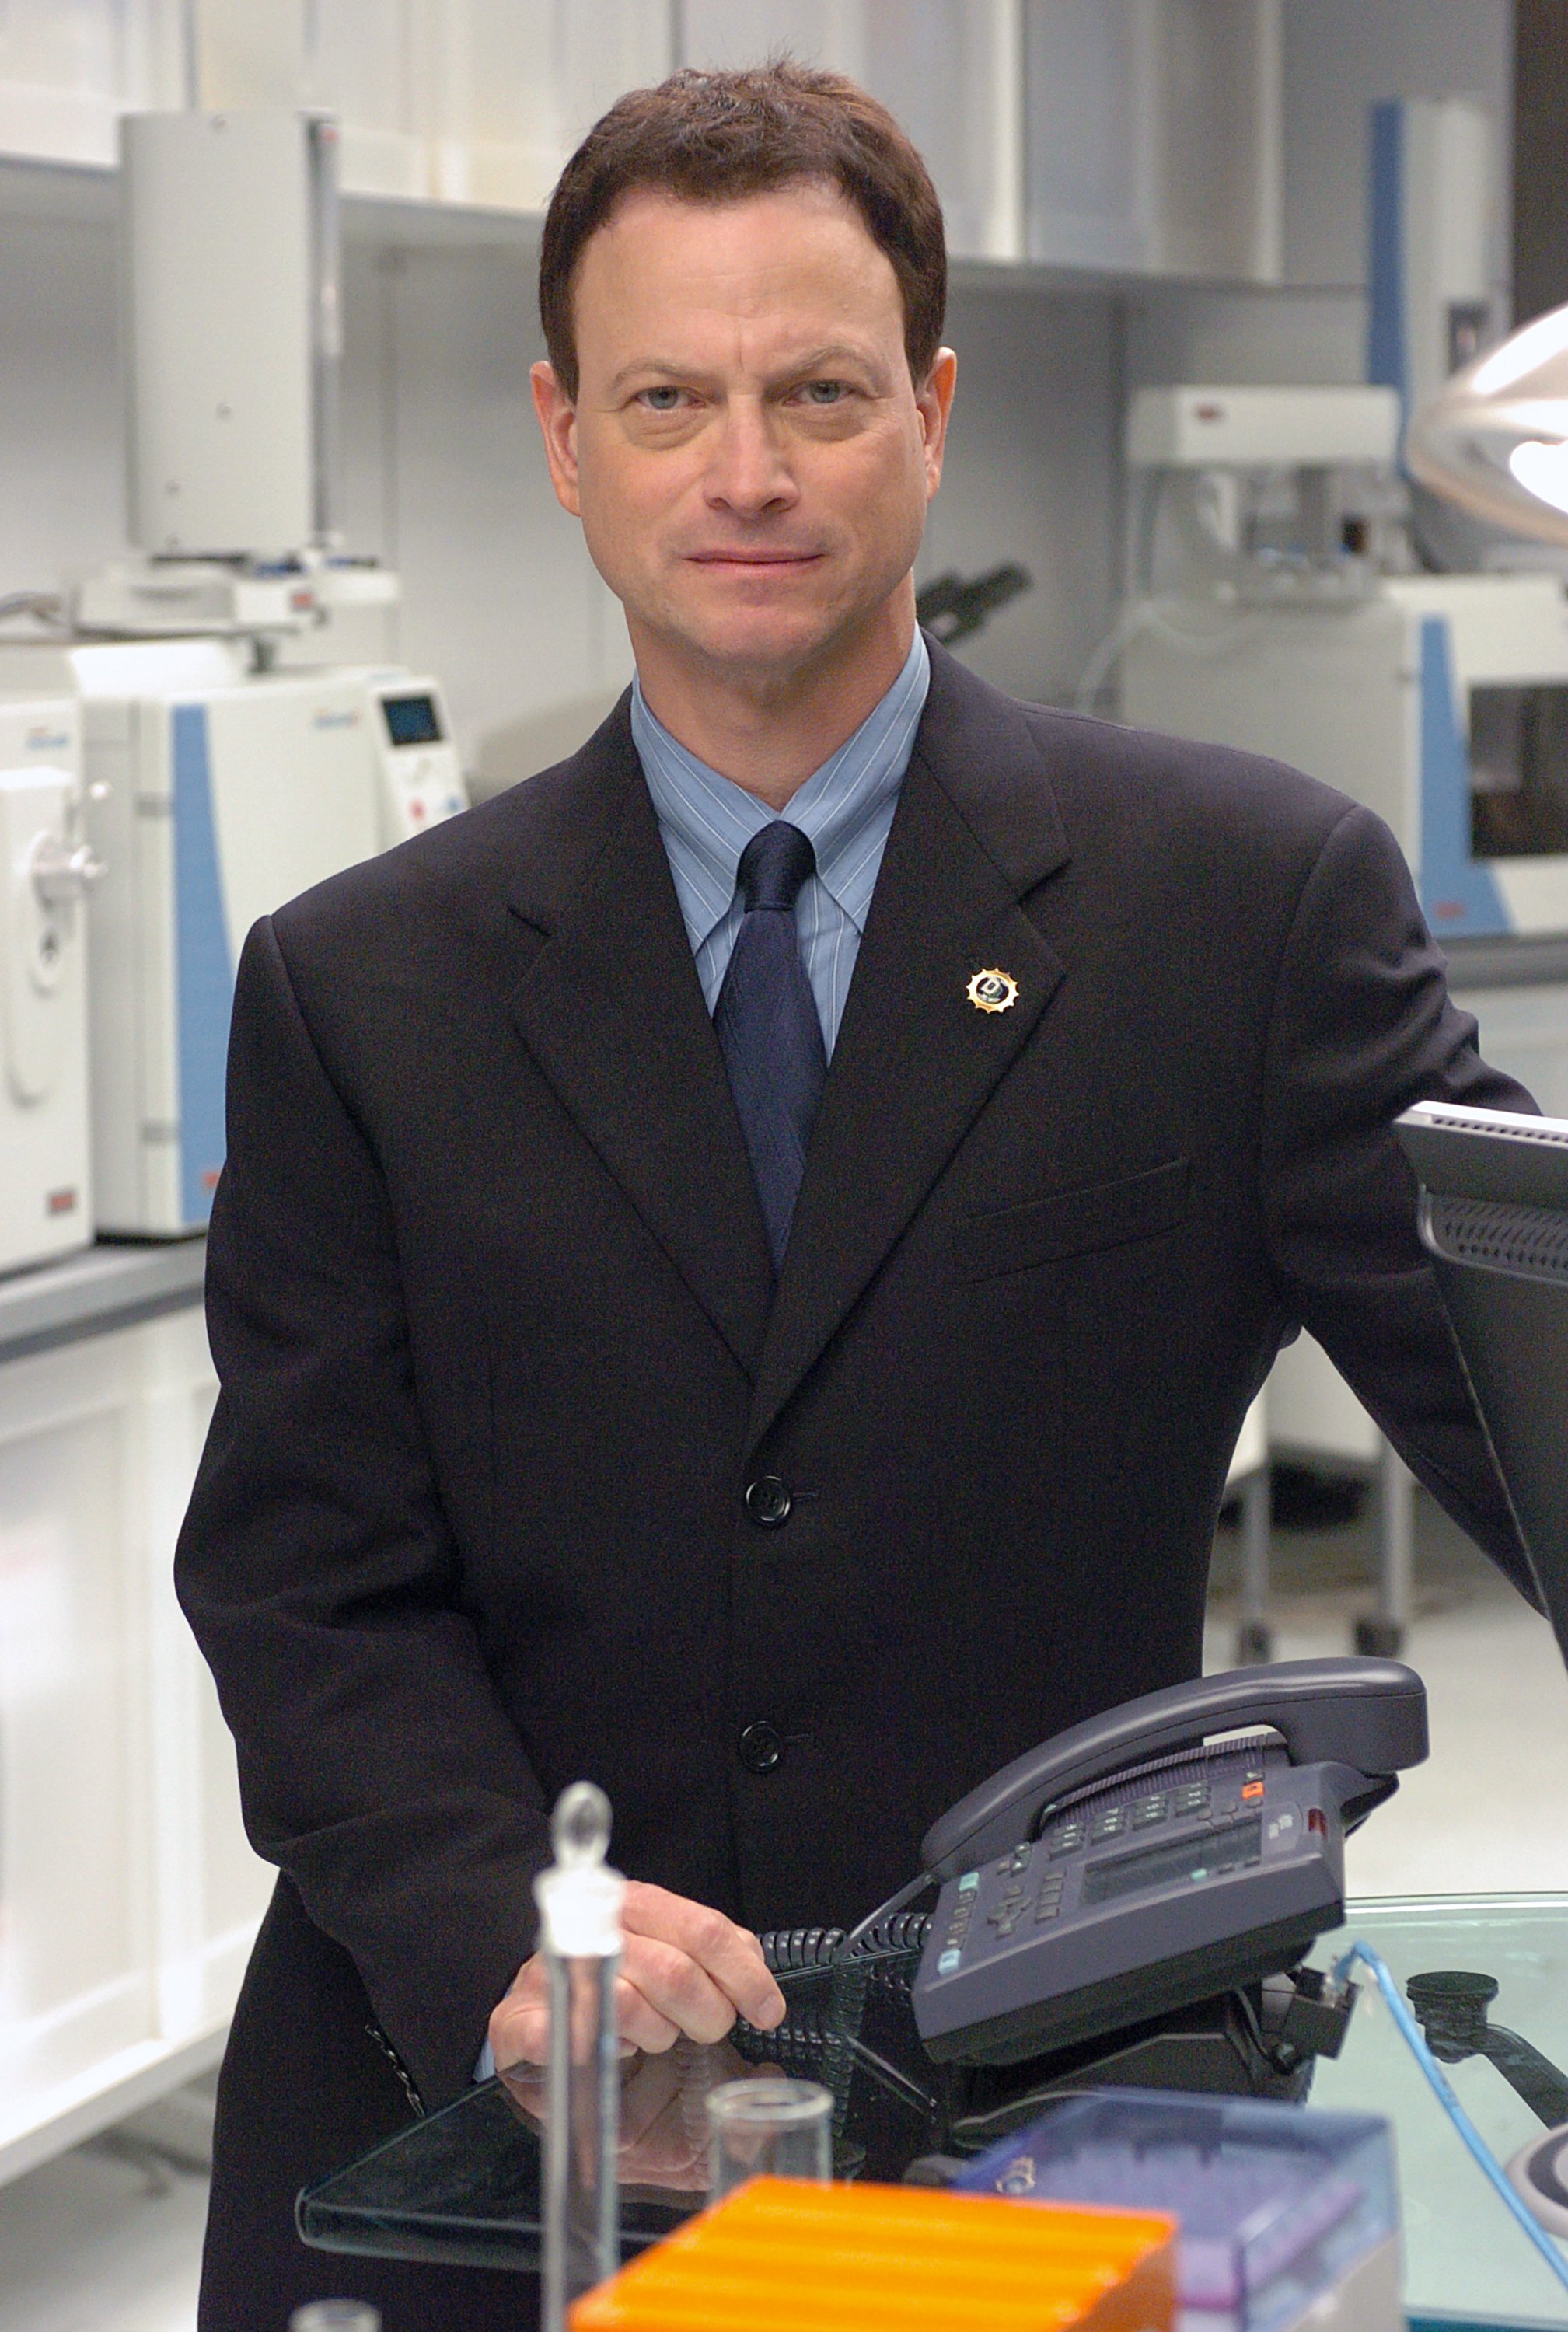 Gary Sinise portraits on the set of television show CSI:NY, September 1, 2004 in Los Angeles, California | Source: Getty Images